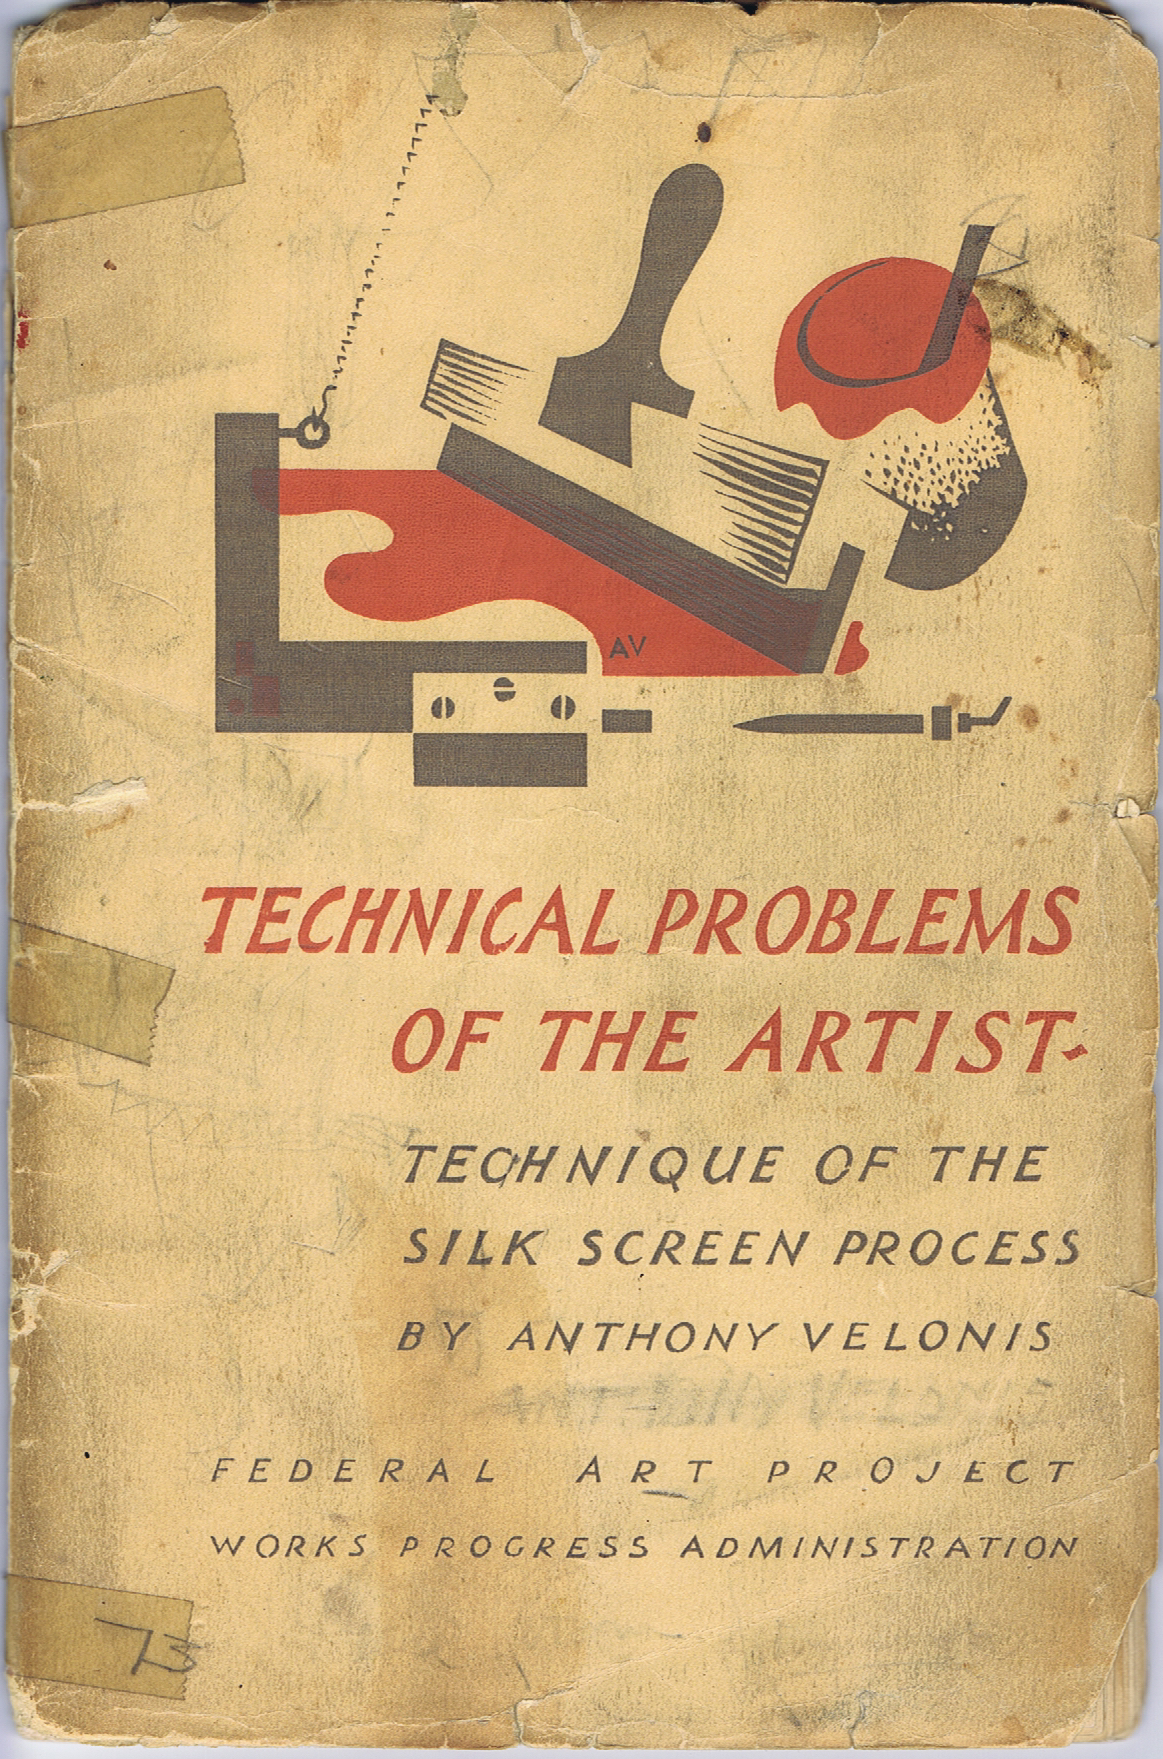 J735	 RARE WPA ARTIST PUBLICATION - “TECHNICAL PROBLEMS OF THE ARTIST” - FEDERAL ARTS PROJECT